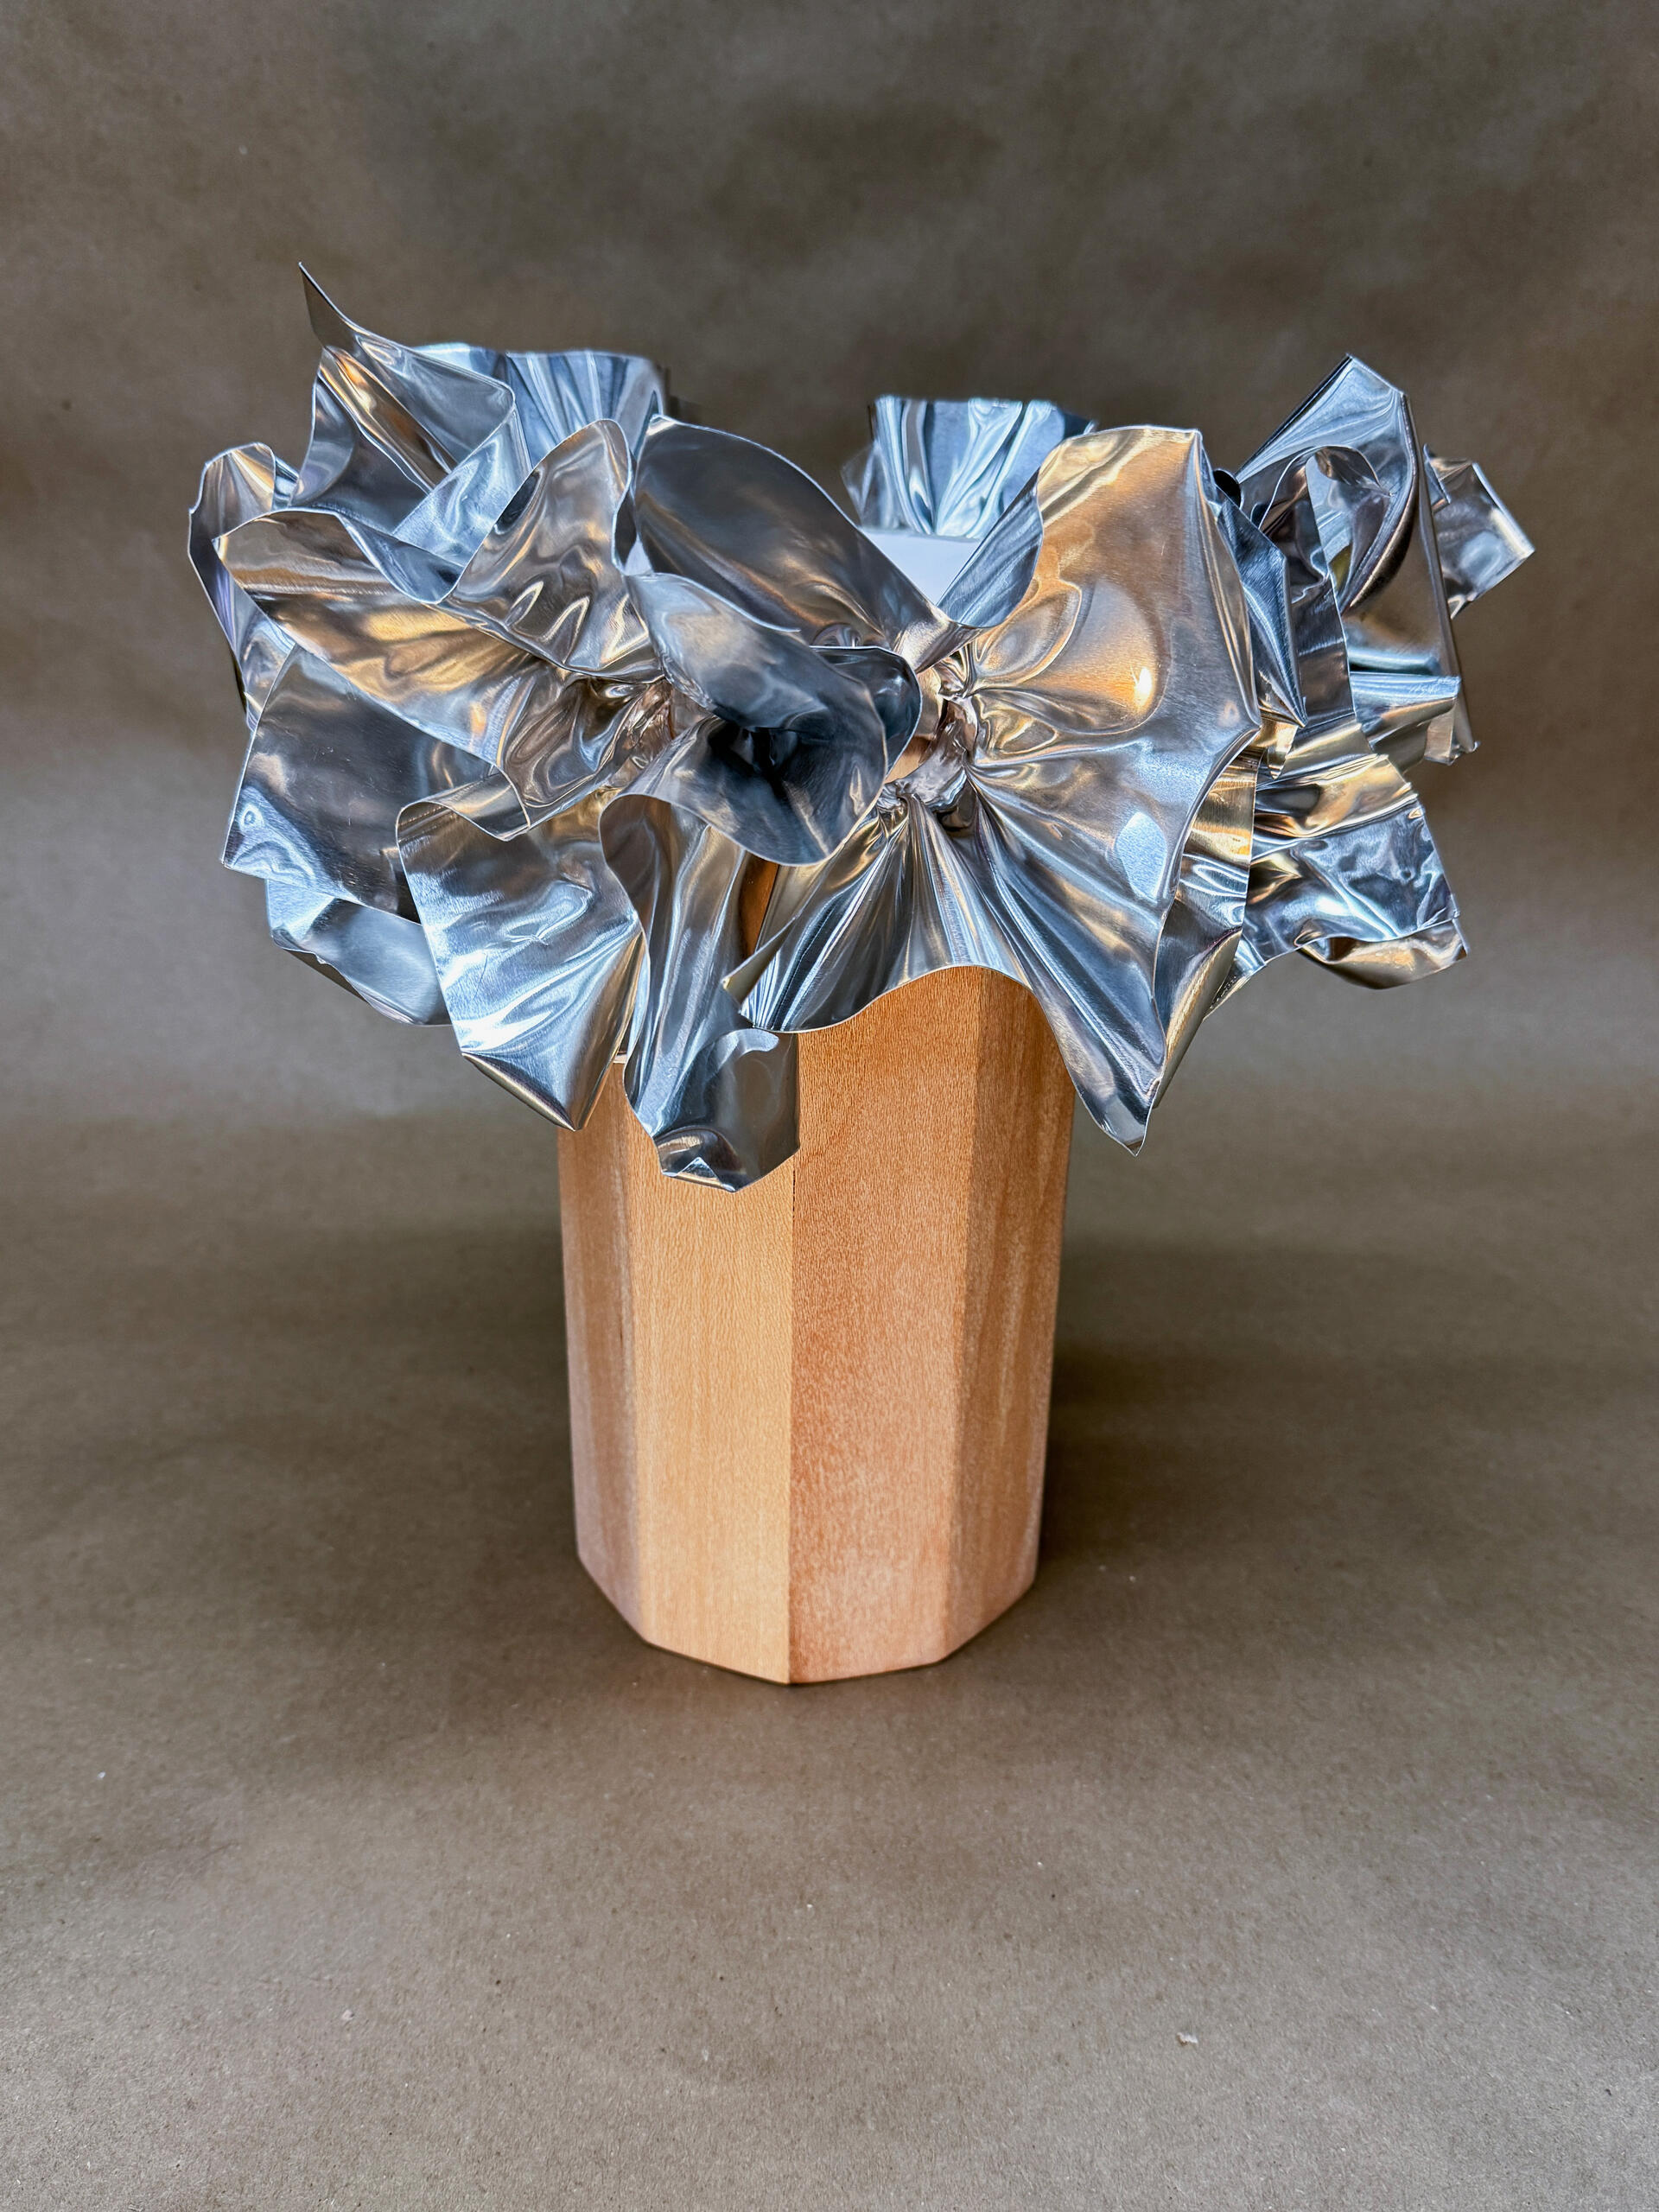 A geometric wooden lamp base contrasts with the lampshade, intricately crumpled and shiny aluminum sheets resembling abstract flowers